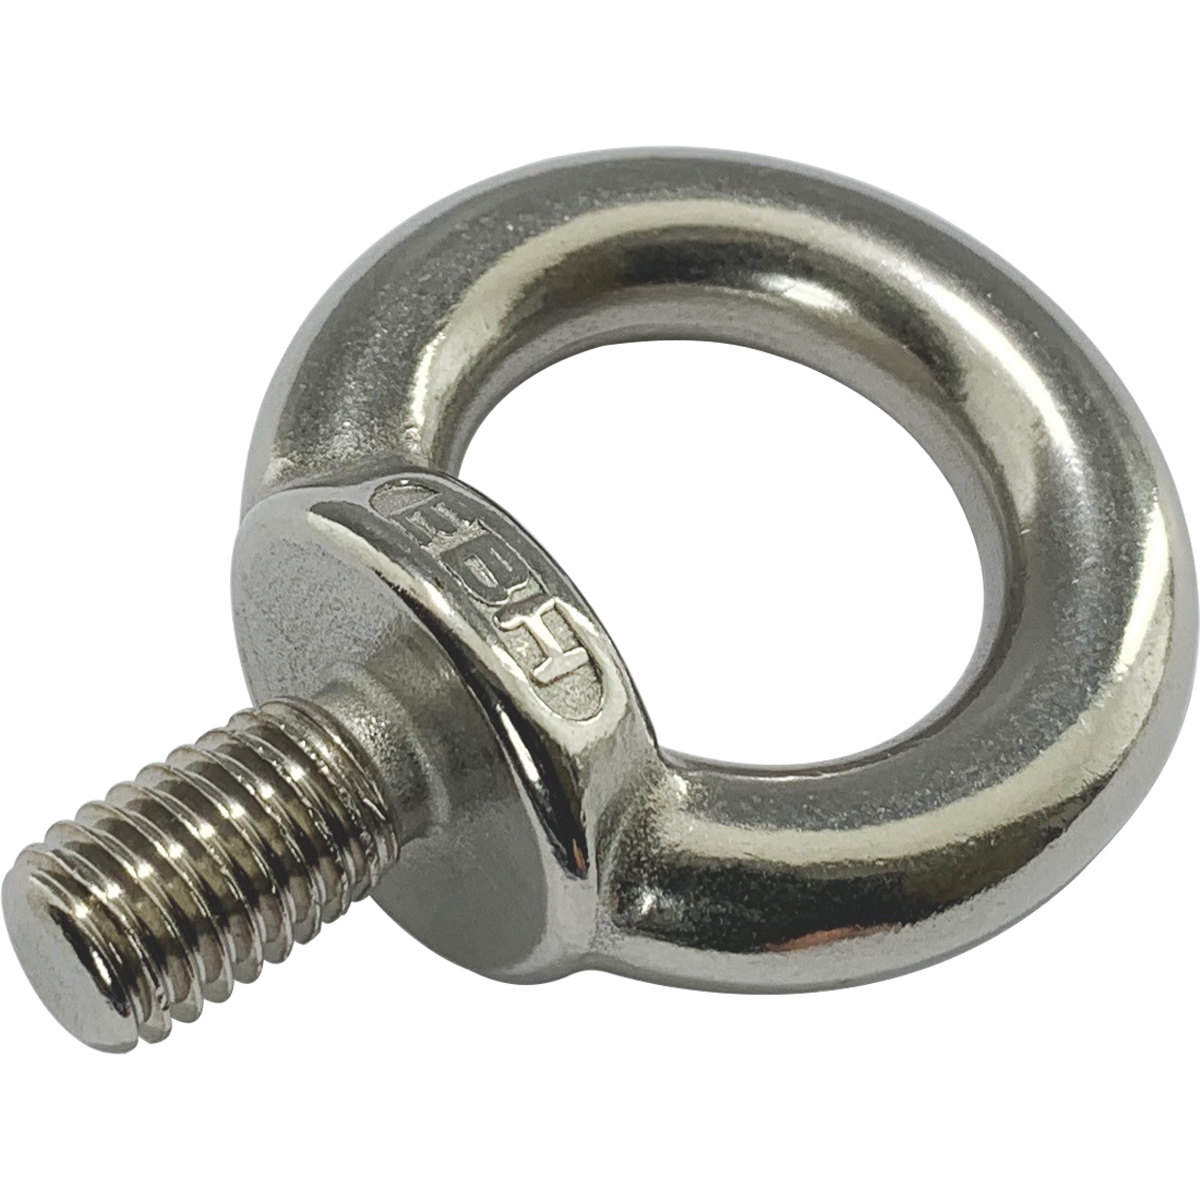 Corrosion resistant, A4 stainless steel lifting eye bolts.